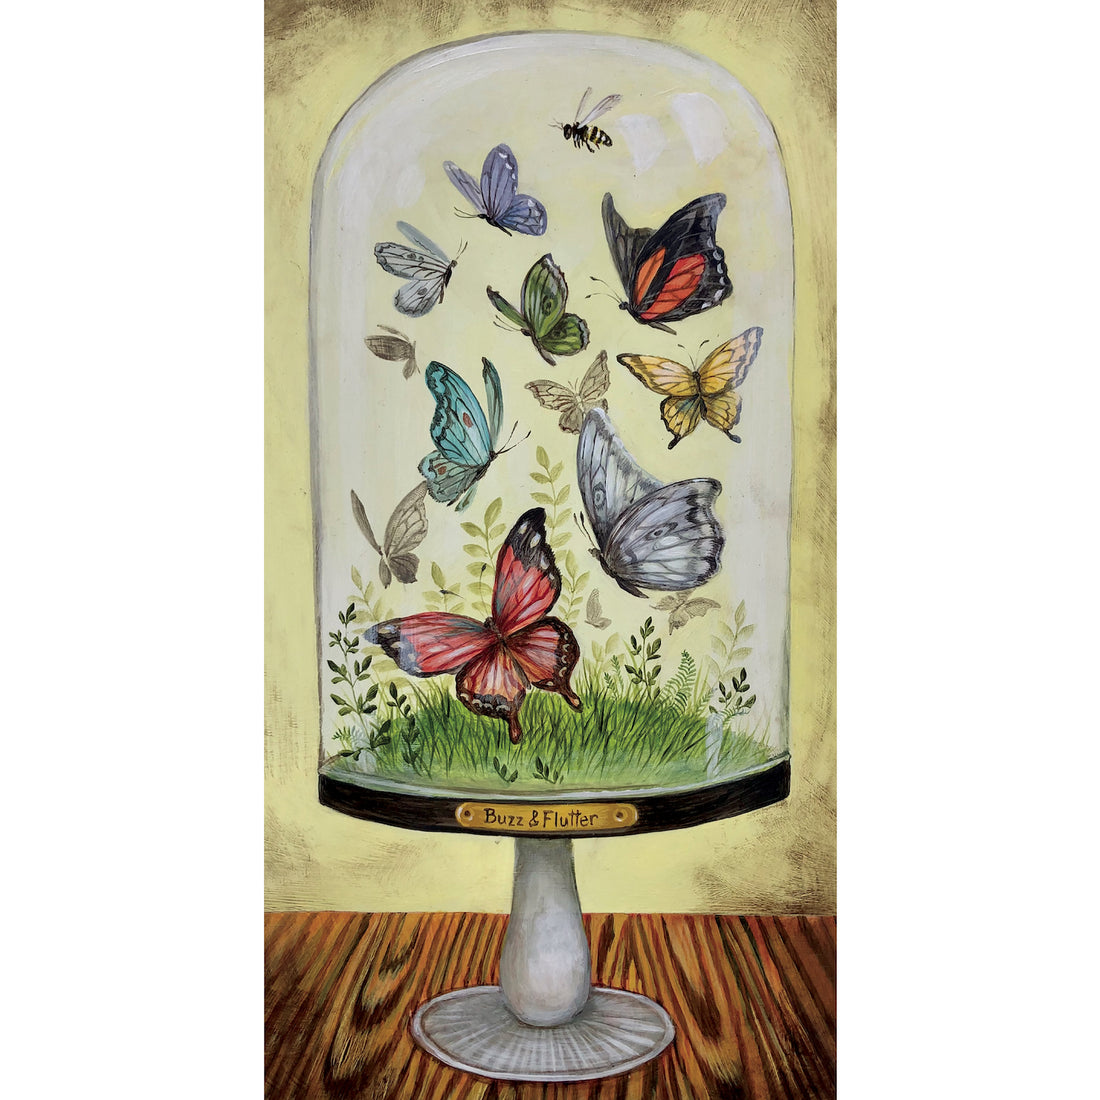 A whimsical illustration of a glass dome on a stand, full of colorful butterflies over a pale yellow background.